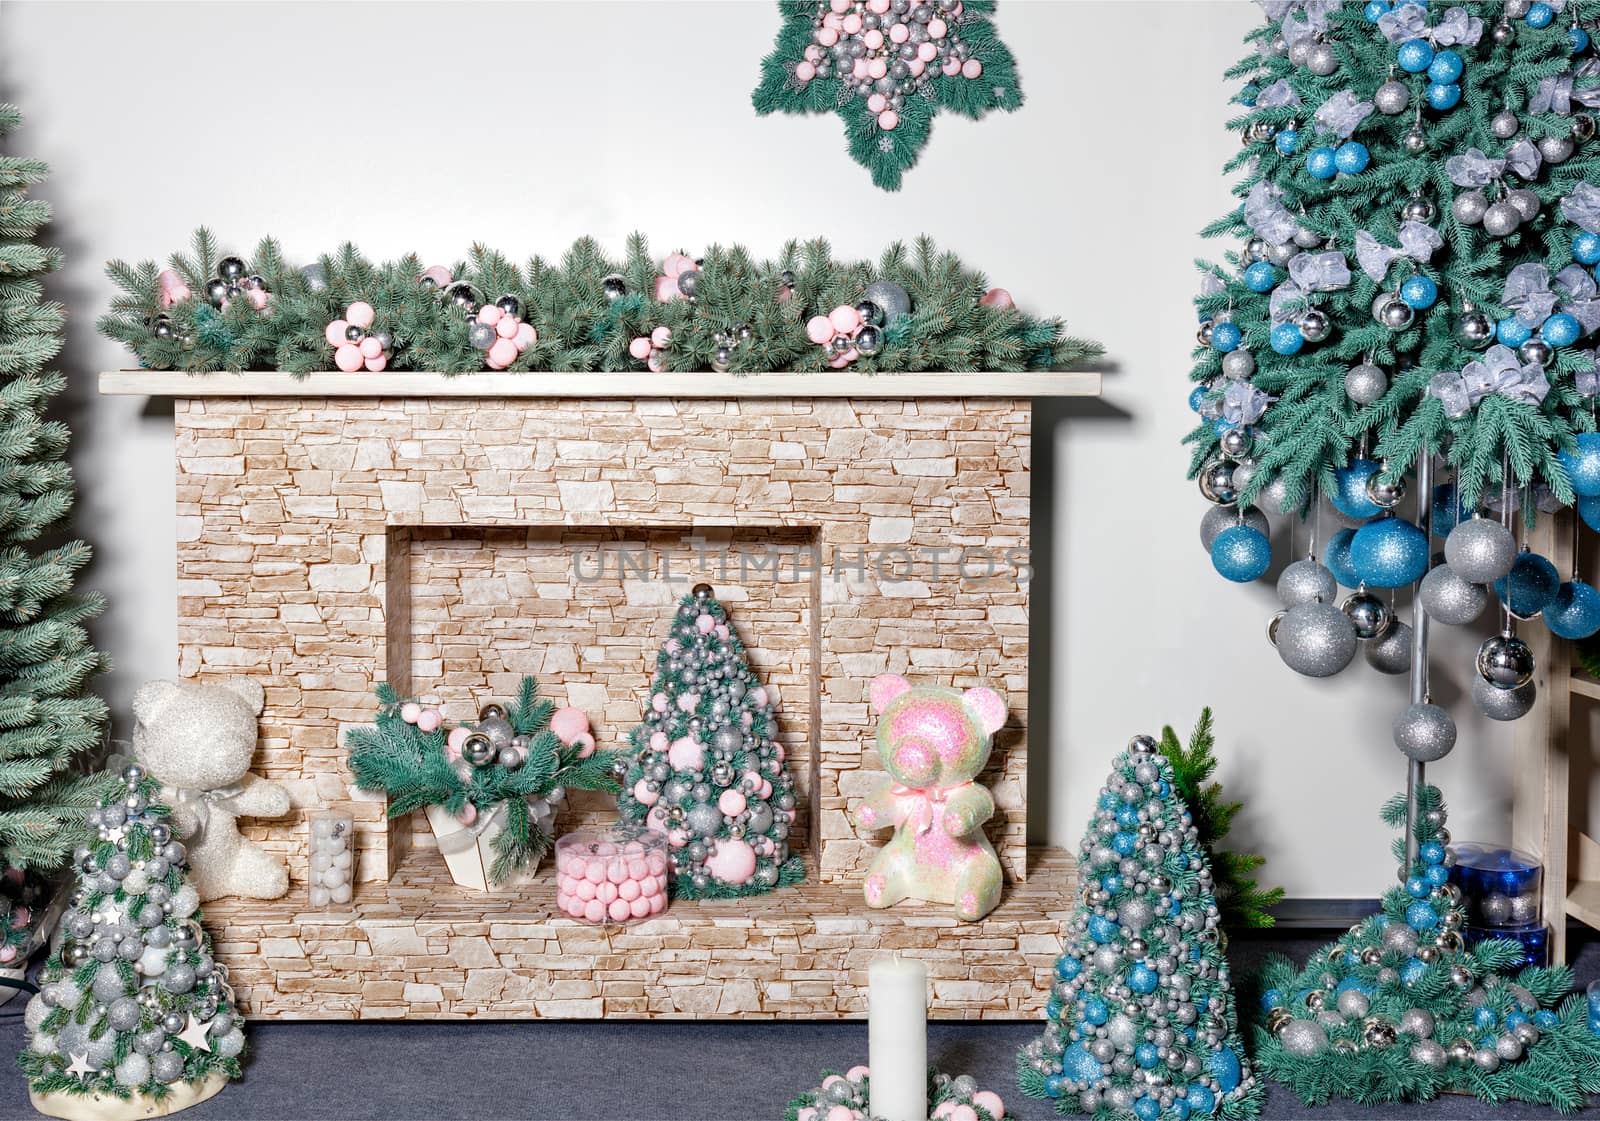 New Years holiday, fireplace with gifts, decorative Christmas trees, toys, balls and fir branches. by Sergii